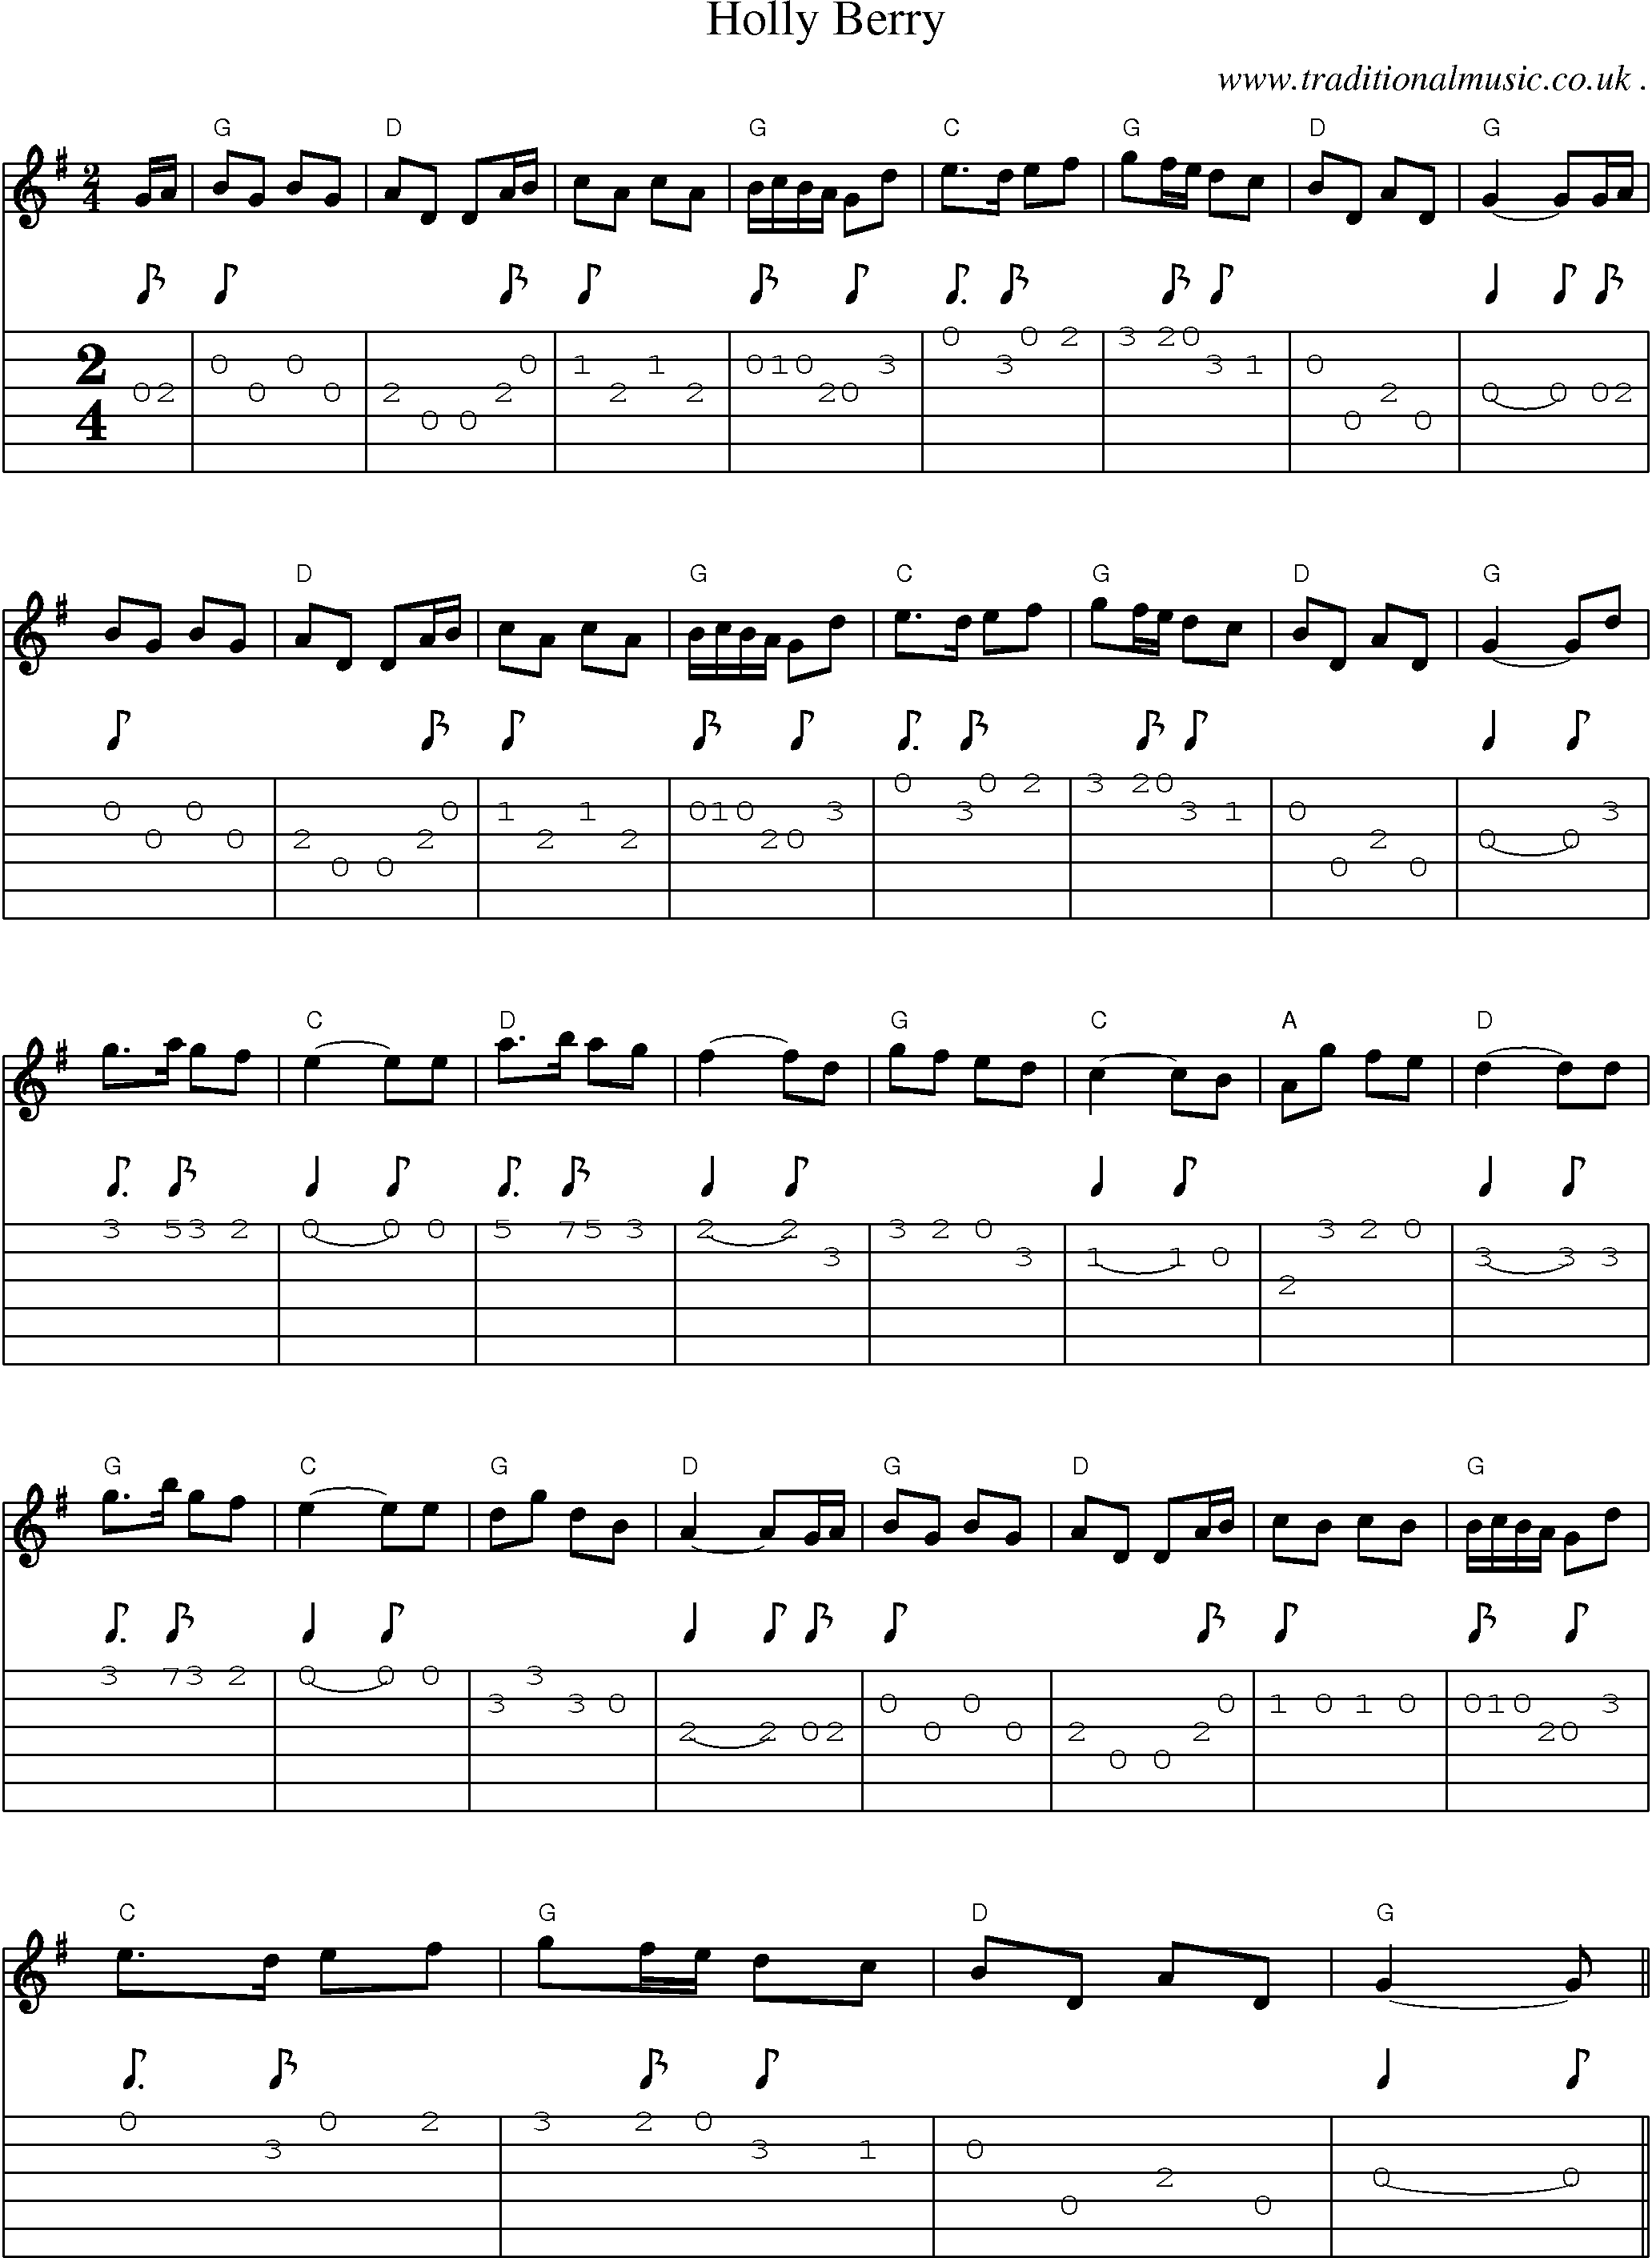 Music Score and Guitar Tabs for Holly Berry